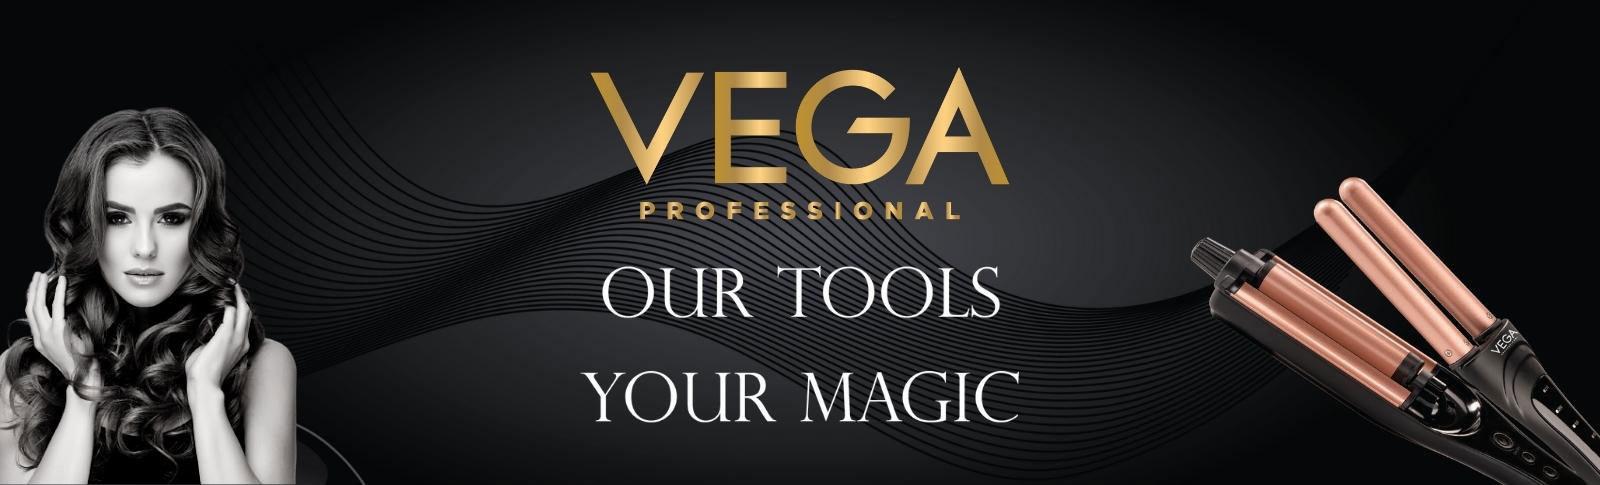 Our Tools Your Magic